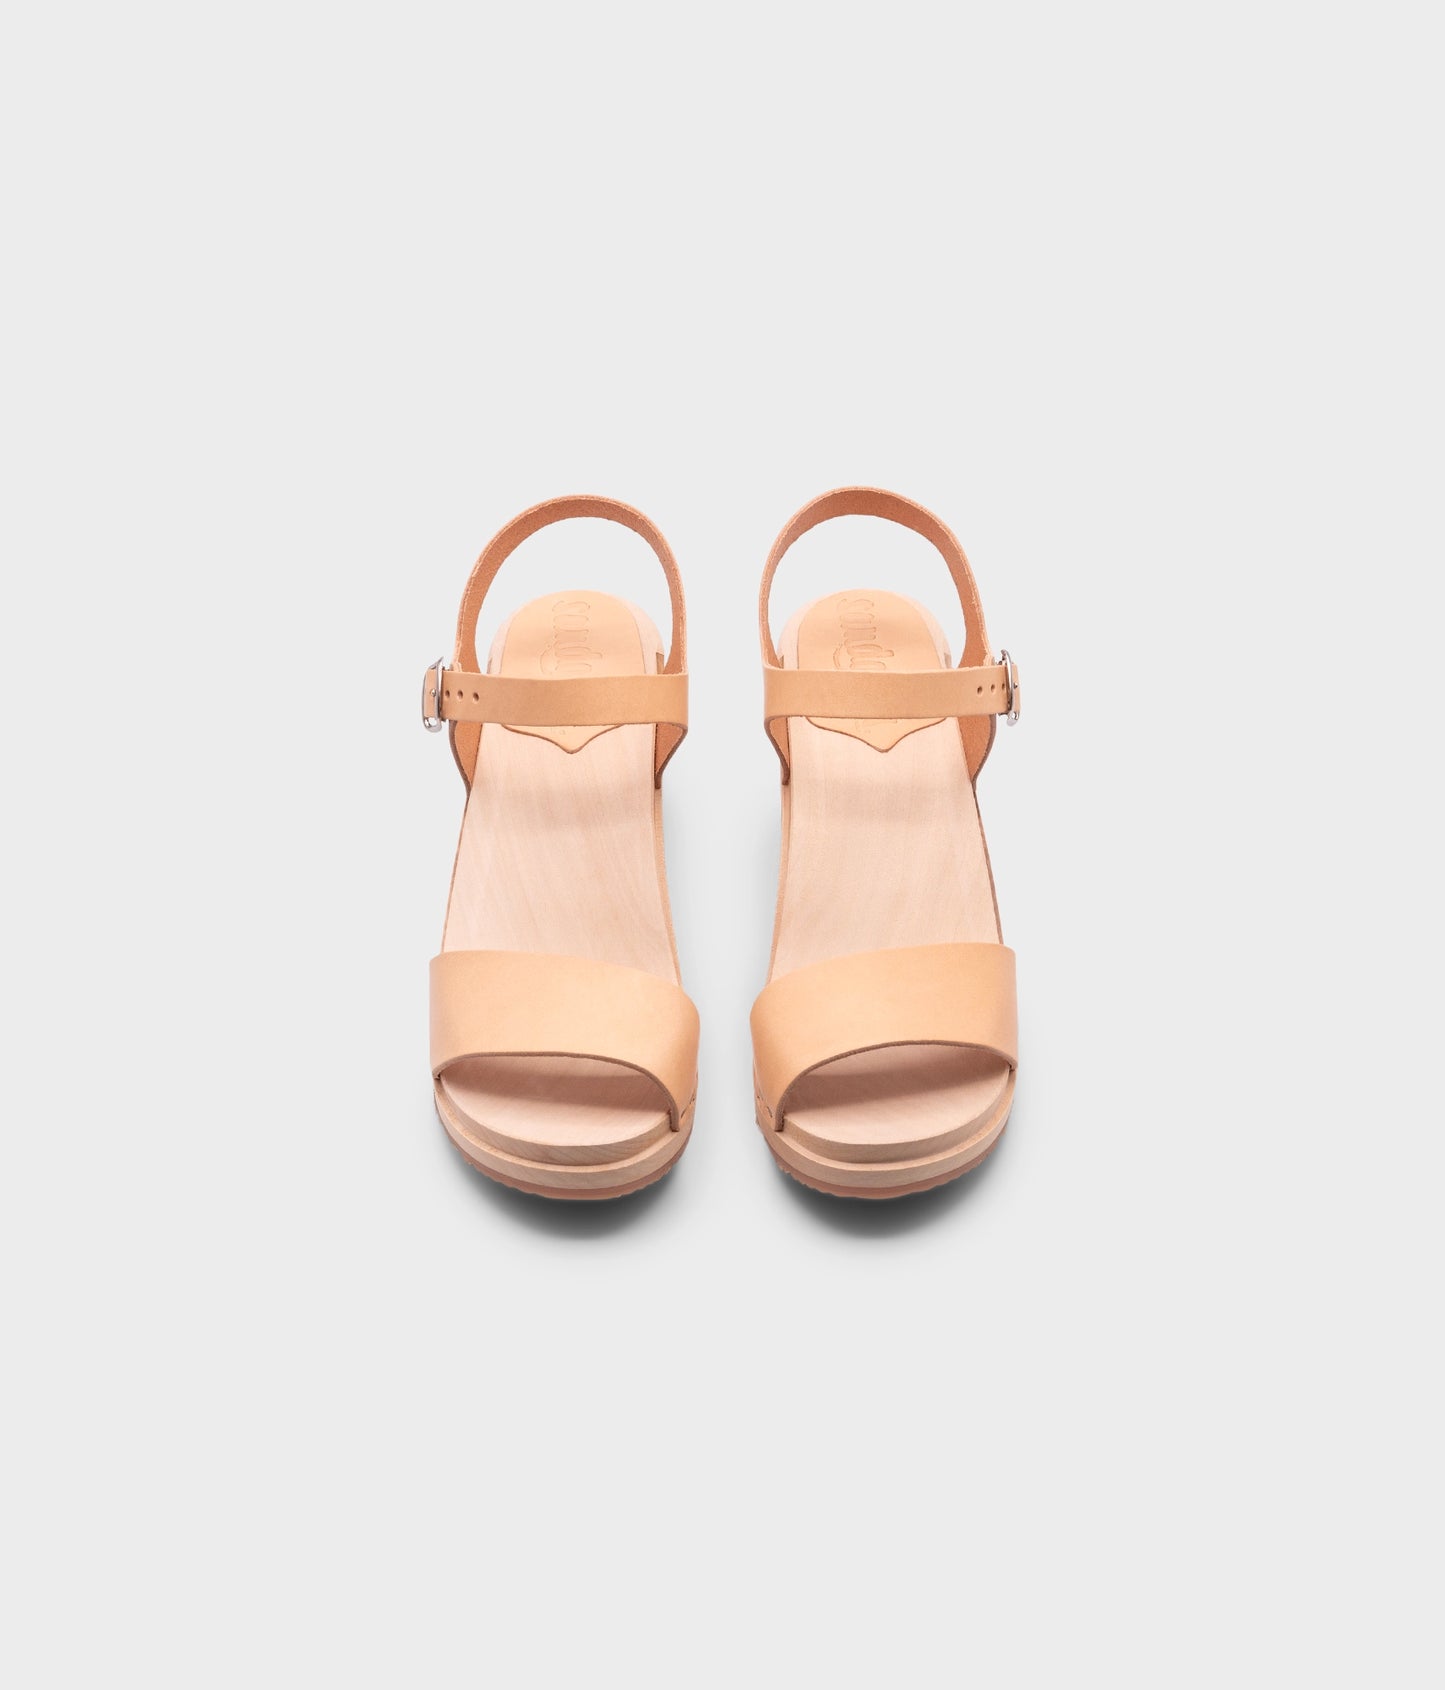 high-heeled open-toe clog sandal in ecru beige vegetable tanned leather stapled on a light wooden base